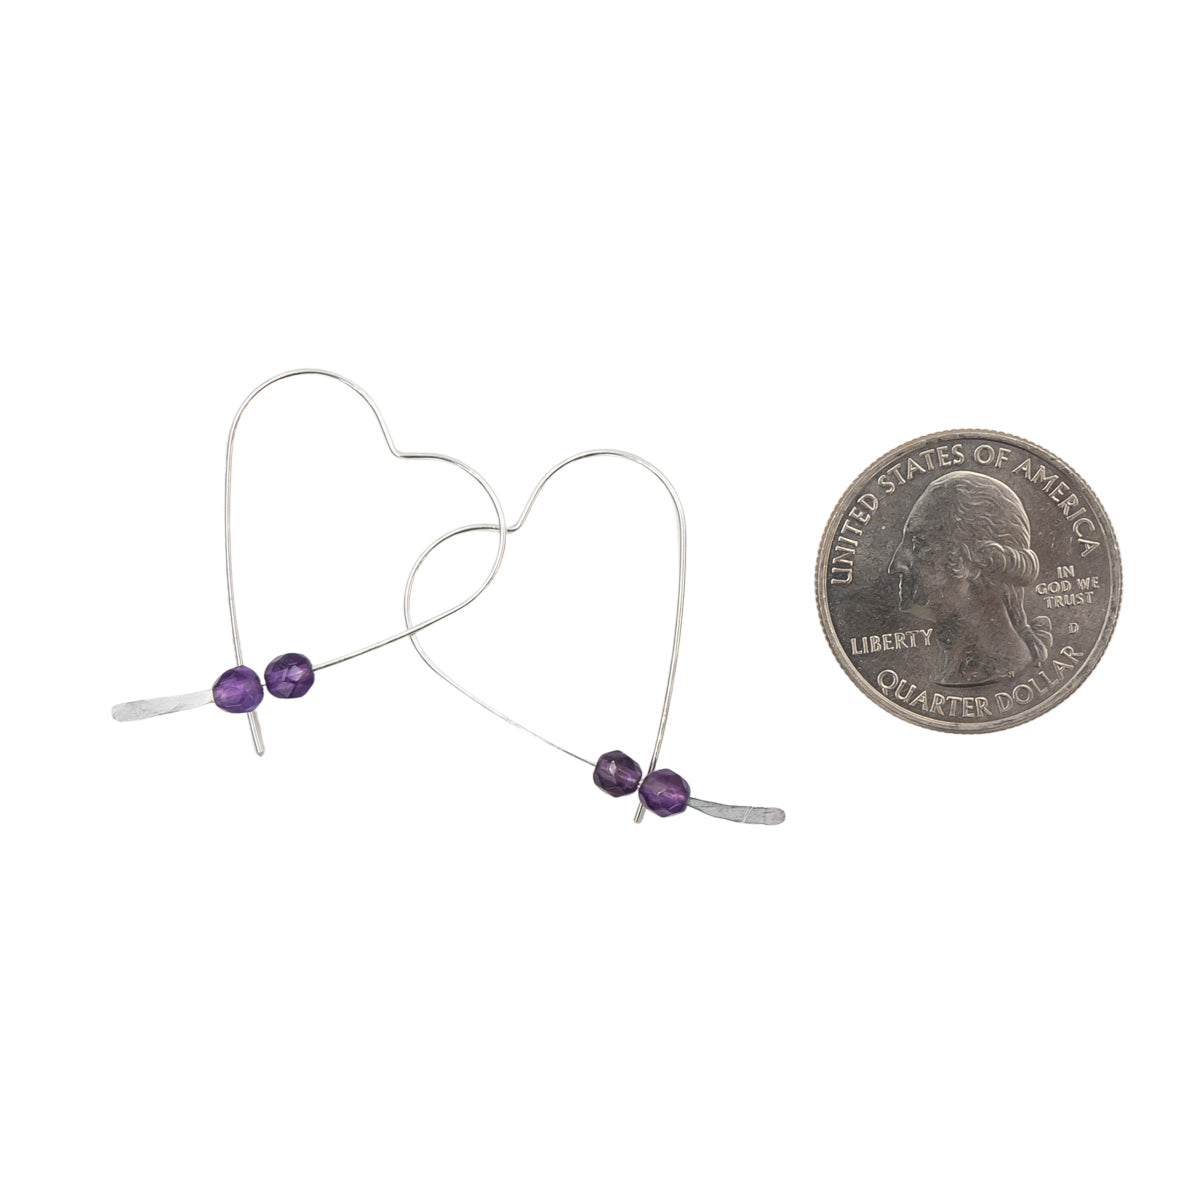 Earth Song Jewelry Handmade Sterling Silver Heart Earrings with faceted Amethyst stones sizing context